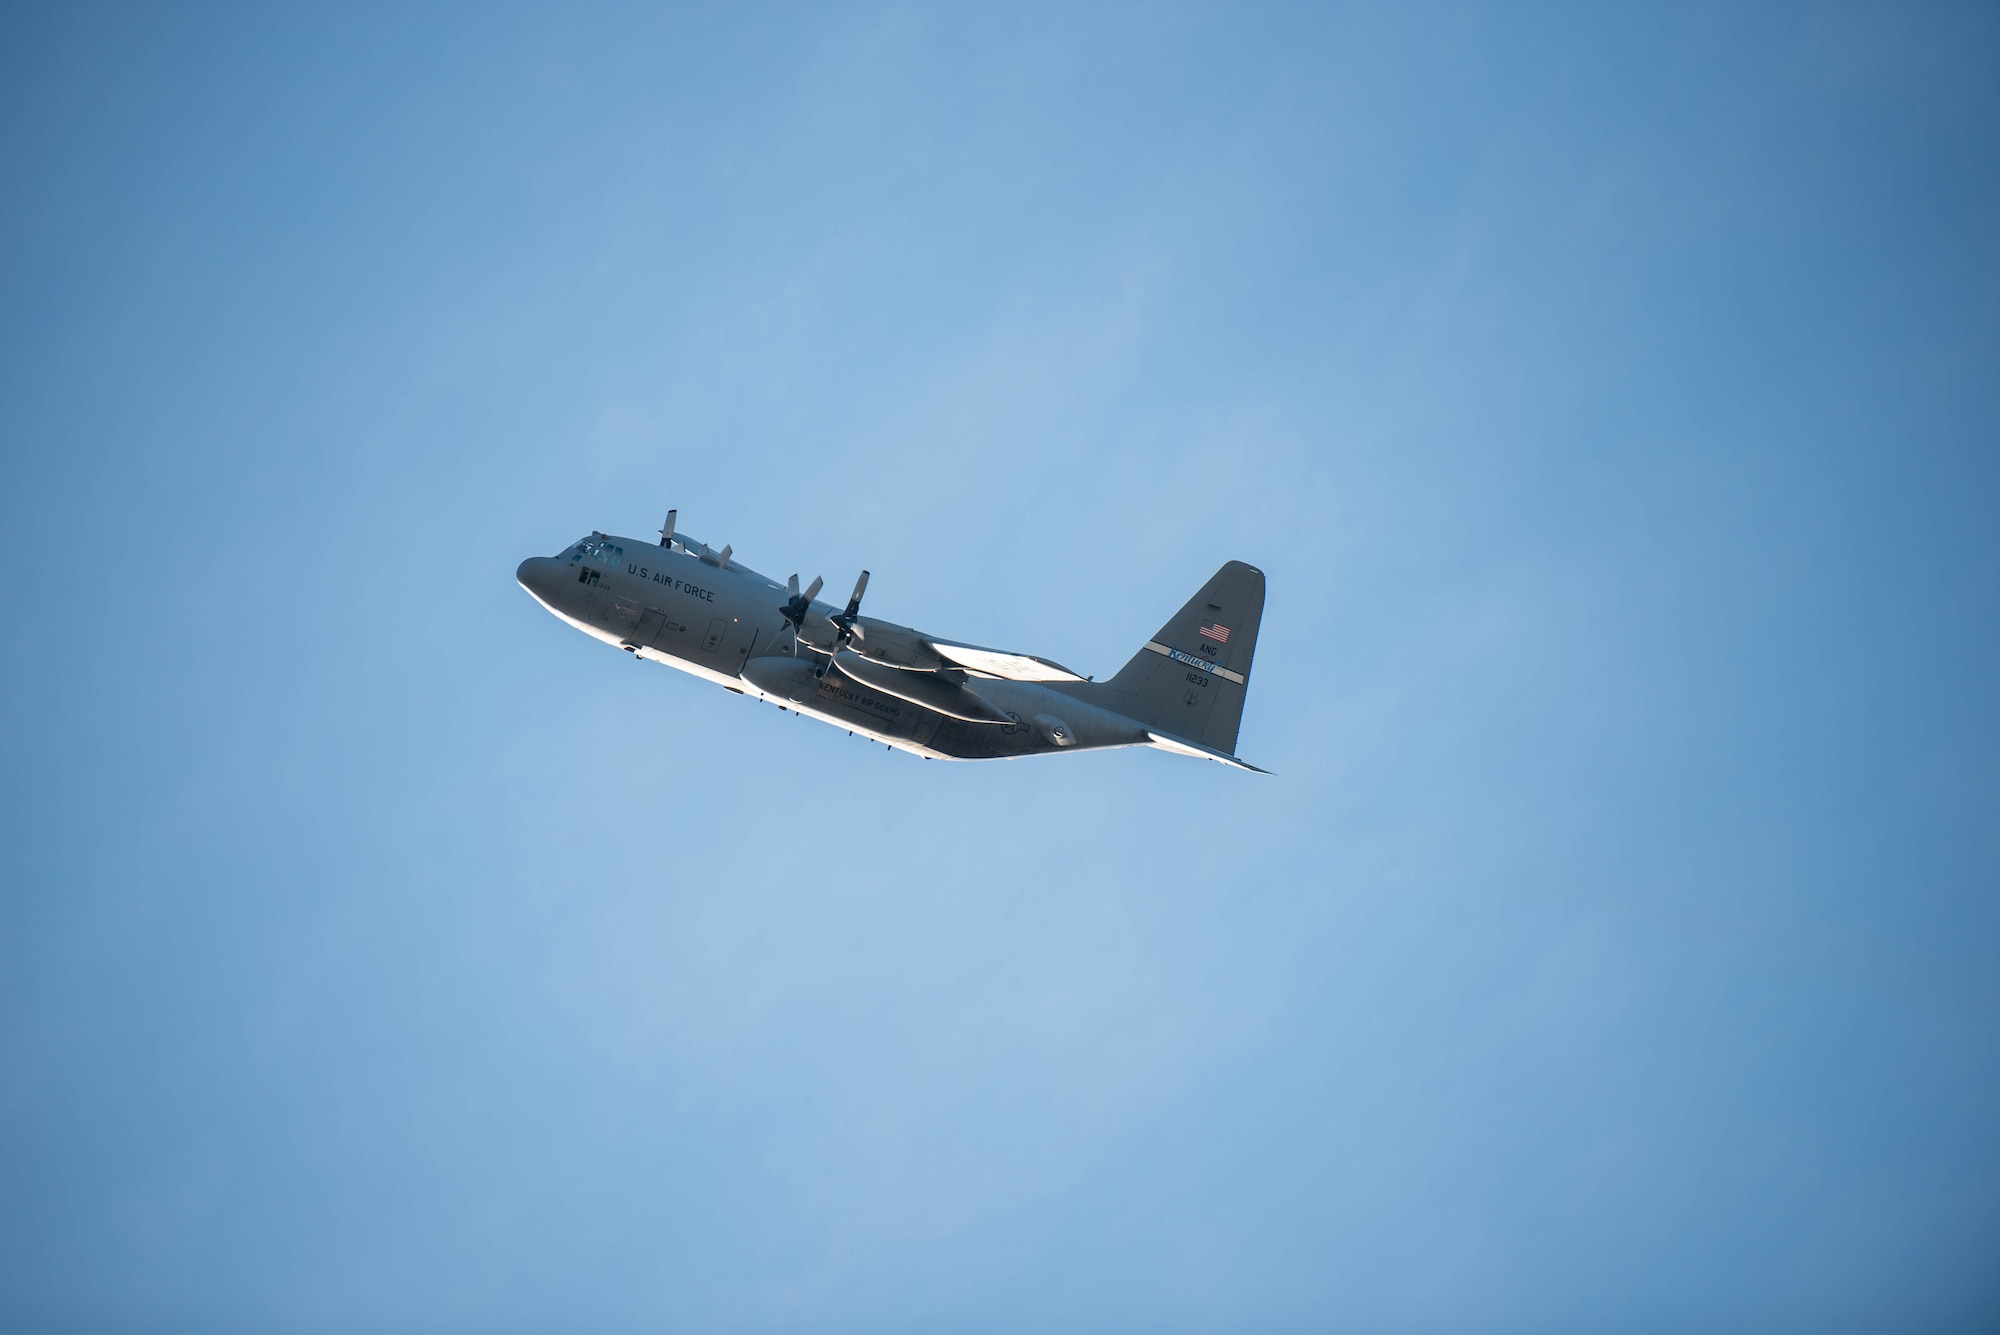 A C-130 Hercules from the 123rd Airlift Wing flies over the Kentucky Air National Guard base as more than 90 Airmen from the unit return home to Louisville, Ky., Nov. 18, 2020, after completing a four-month deployment to the Middle East in support of Operations Inherent Resolve and Freedom’s Sentinel. The Airmen operated from an undisclosed air base while flying troops and cargo across the U.S. Central Command Area of Responsibility. (U.S. Air National Guard photo by Phil Speck)